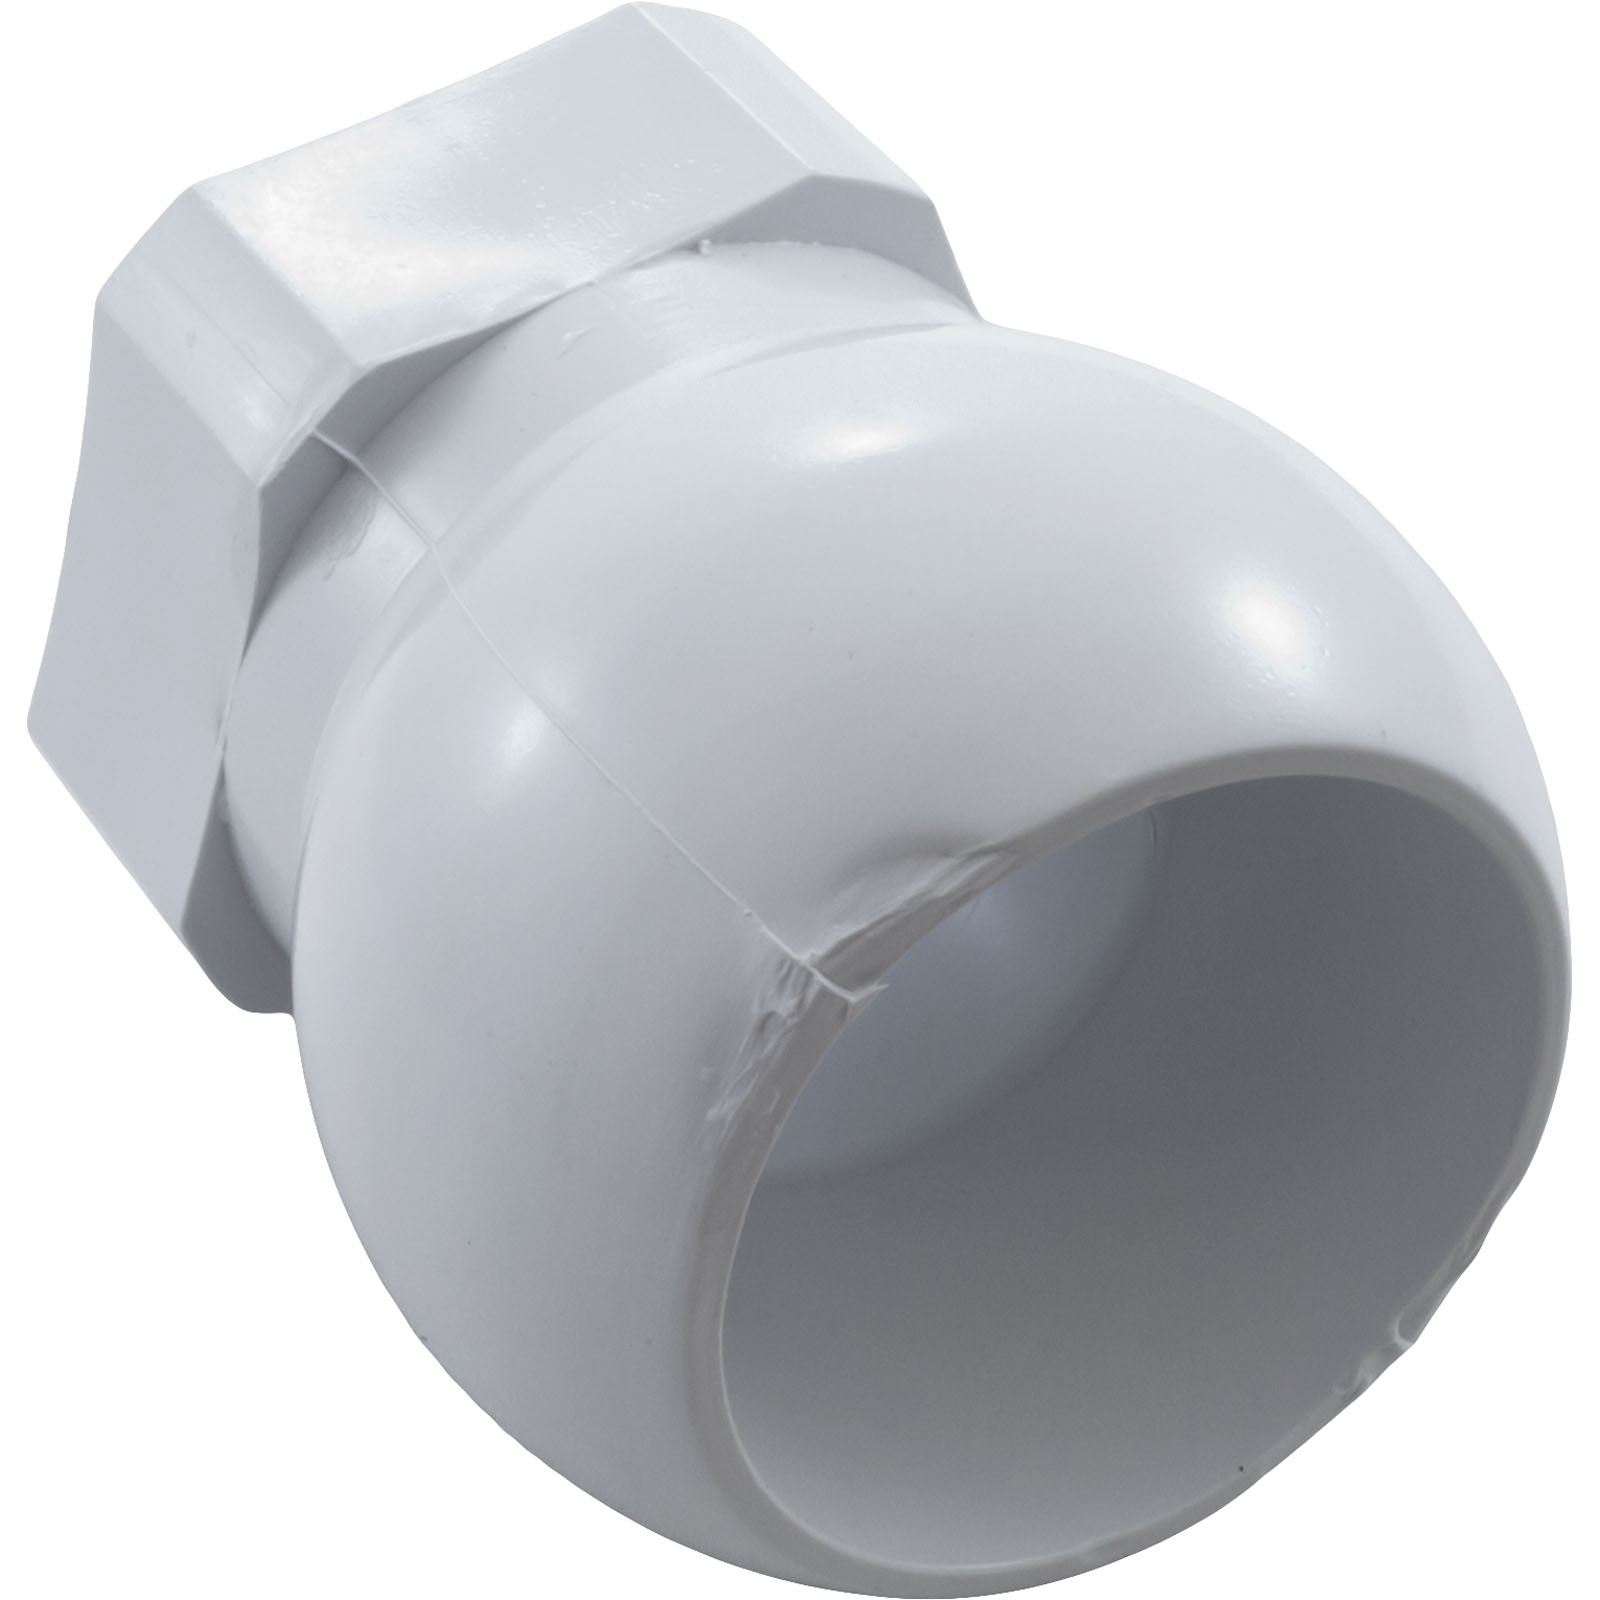 NOZZLE, JACUZZI P AND W HYDROTHERAPY JET 25E, DIR, WHITE | 43-0650-02-R